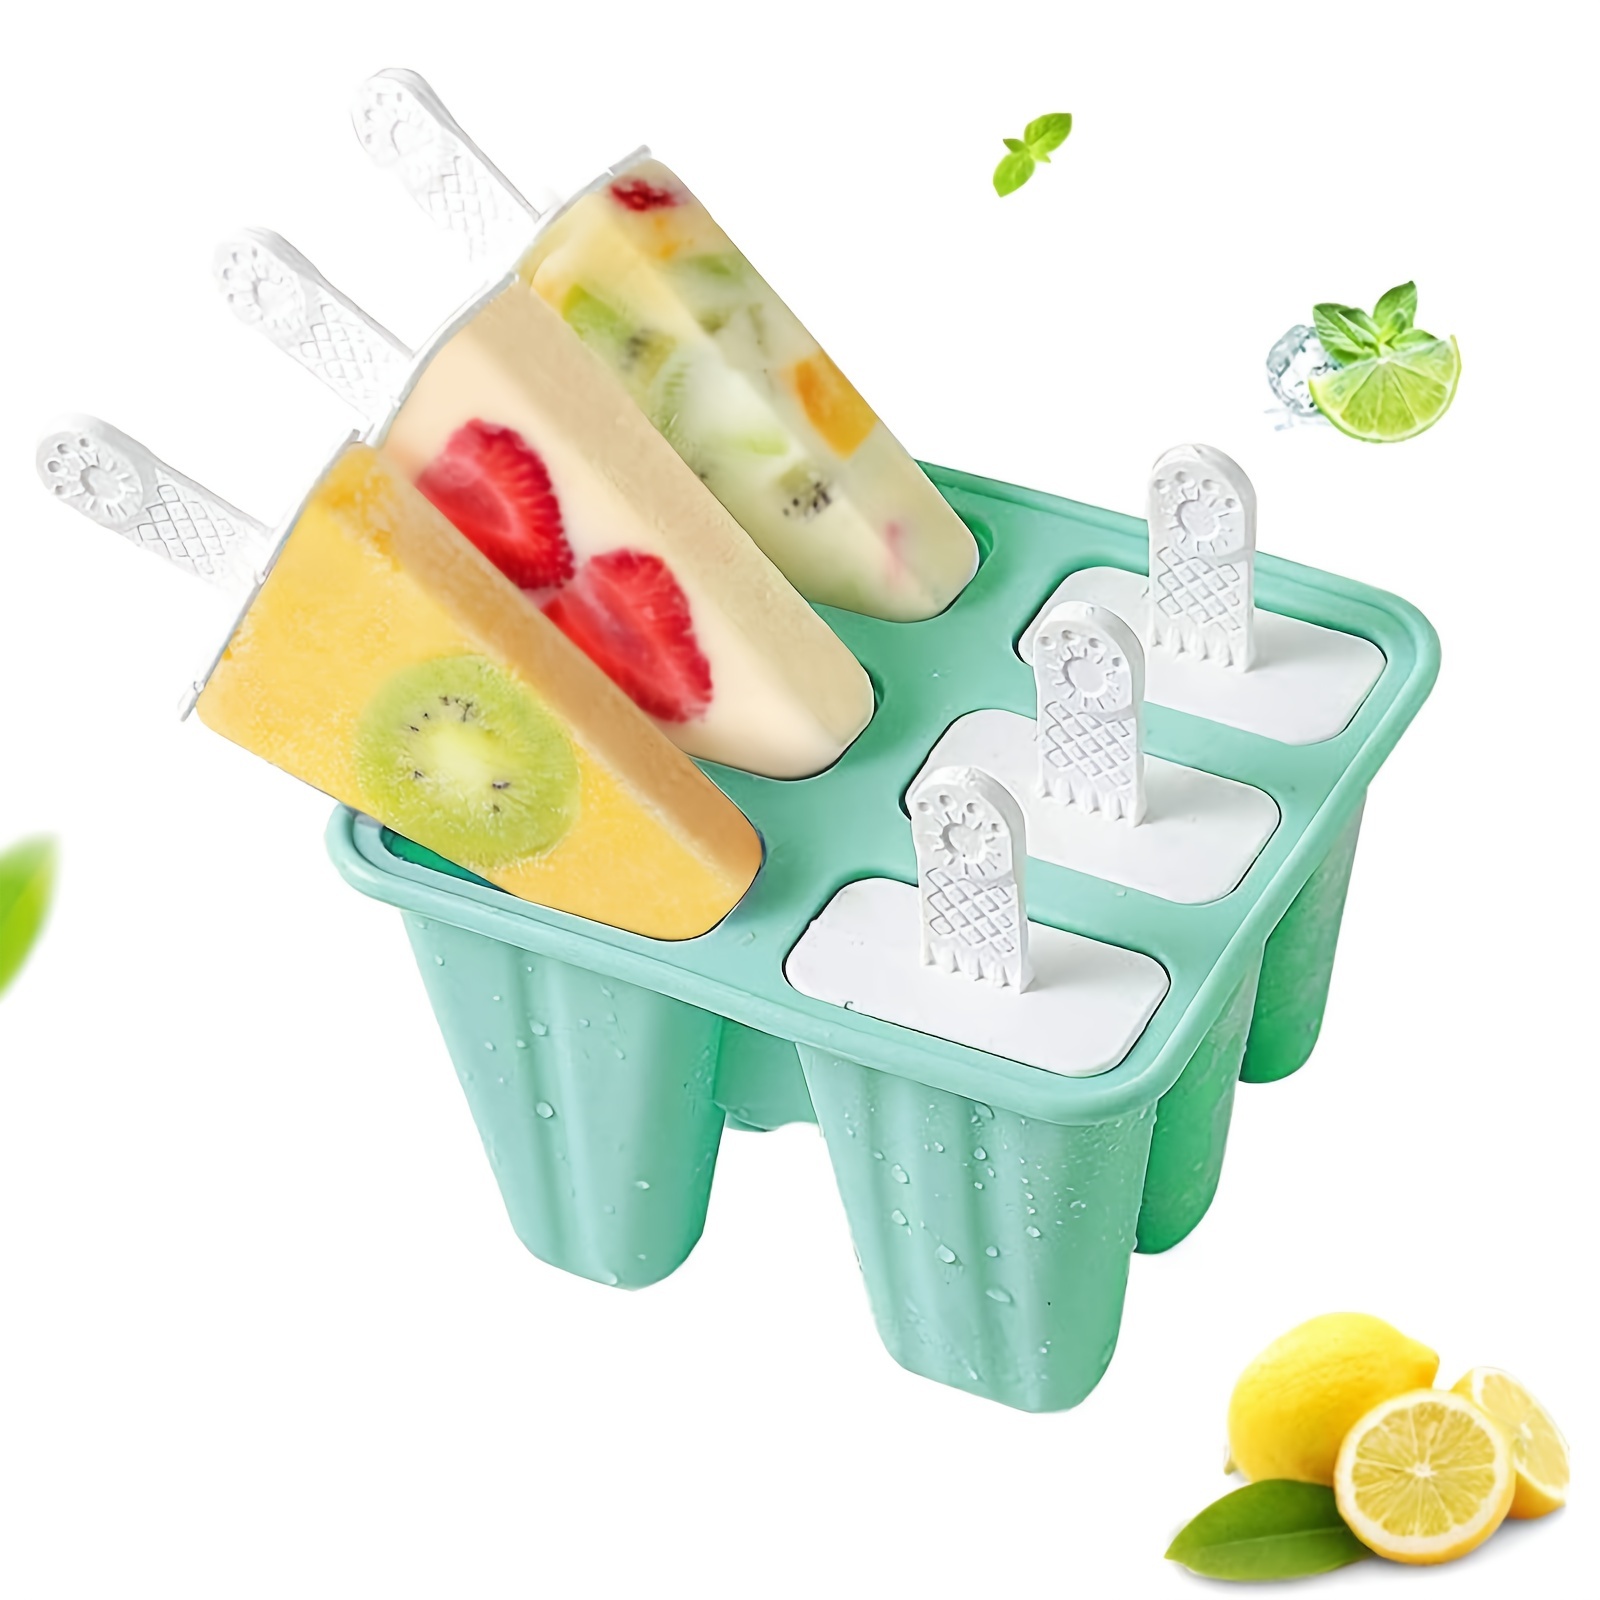 Silicone Popsicle Molds Bpa-Free Ice Pop Molds With Lids Packs Of